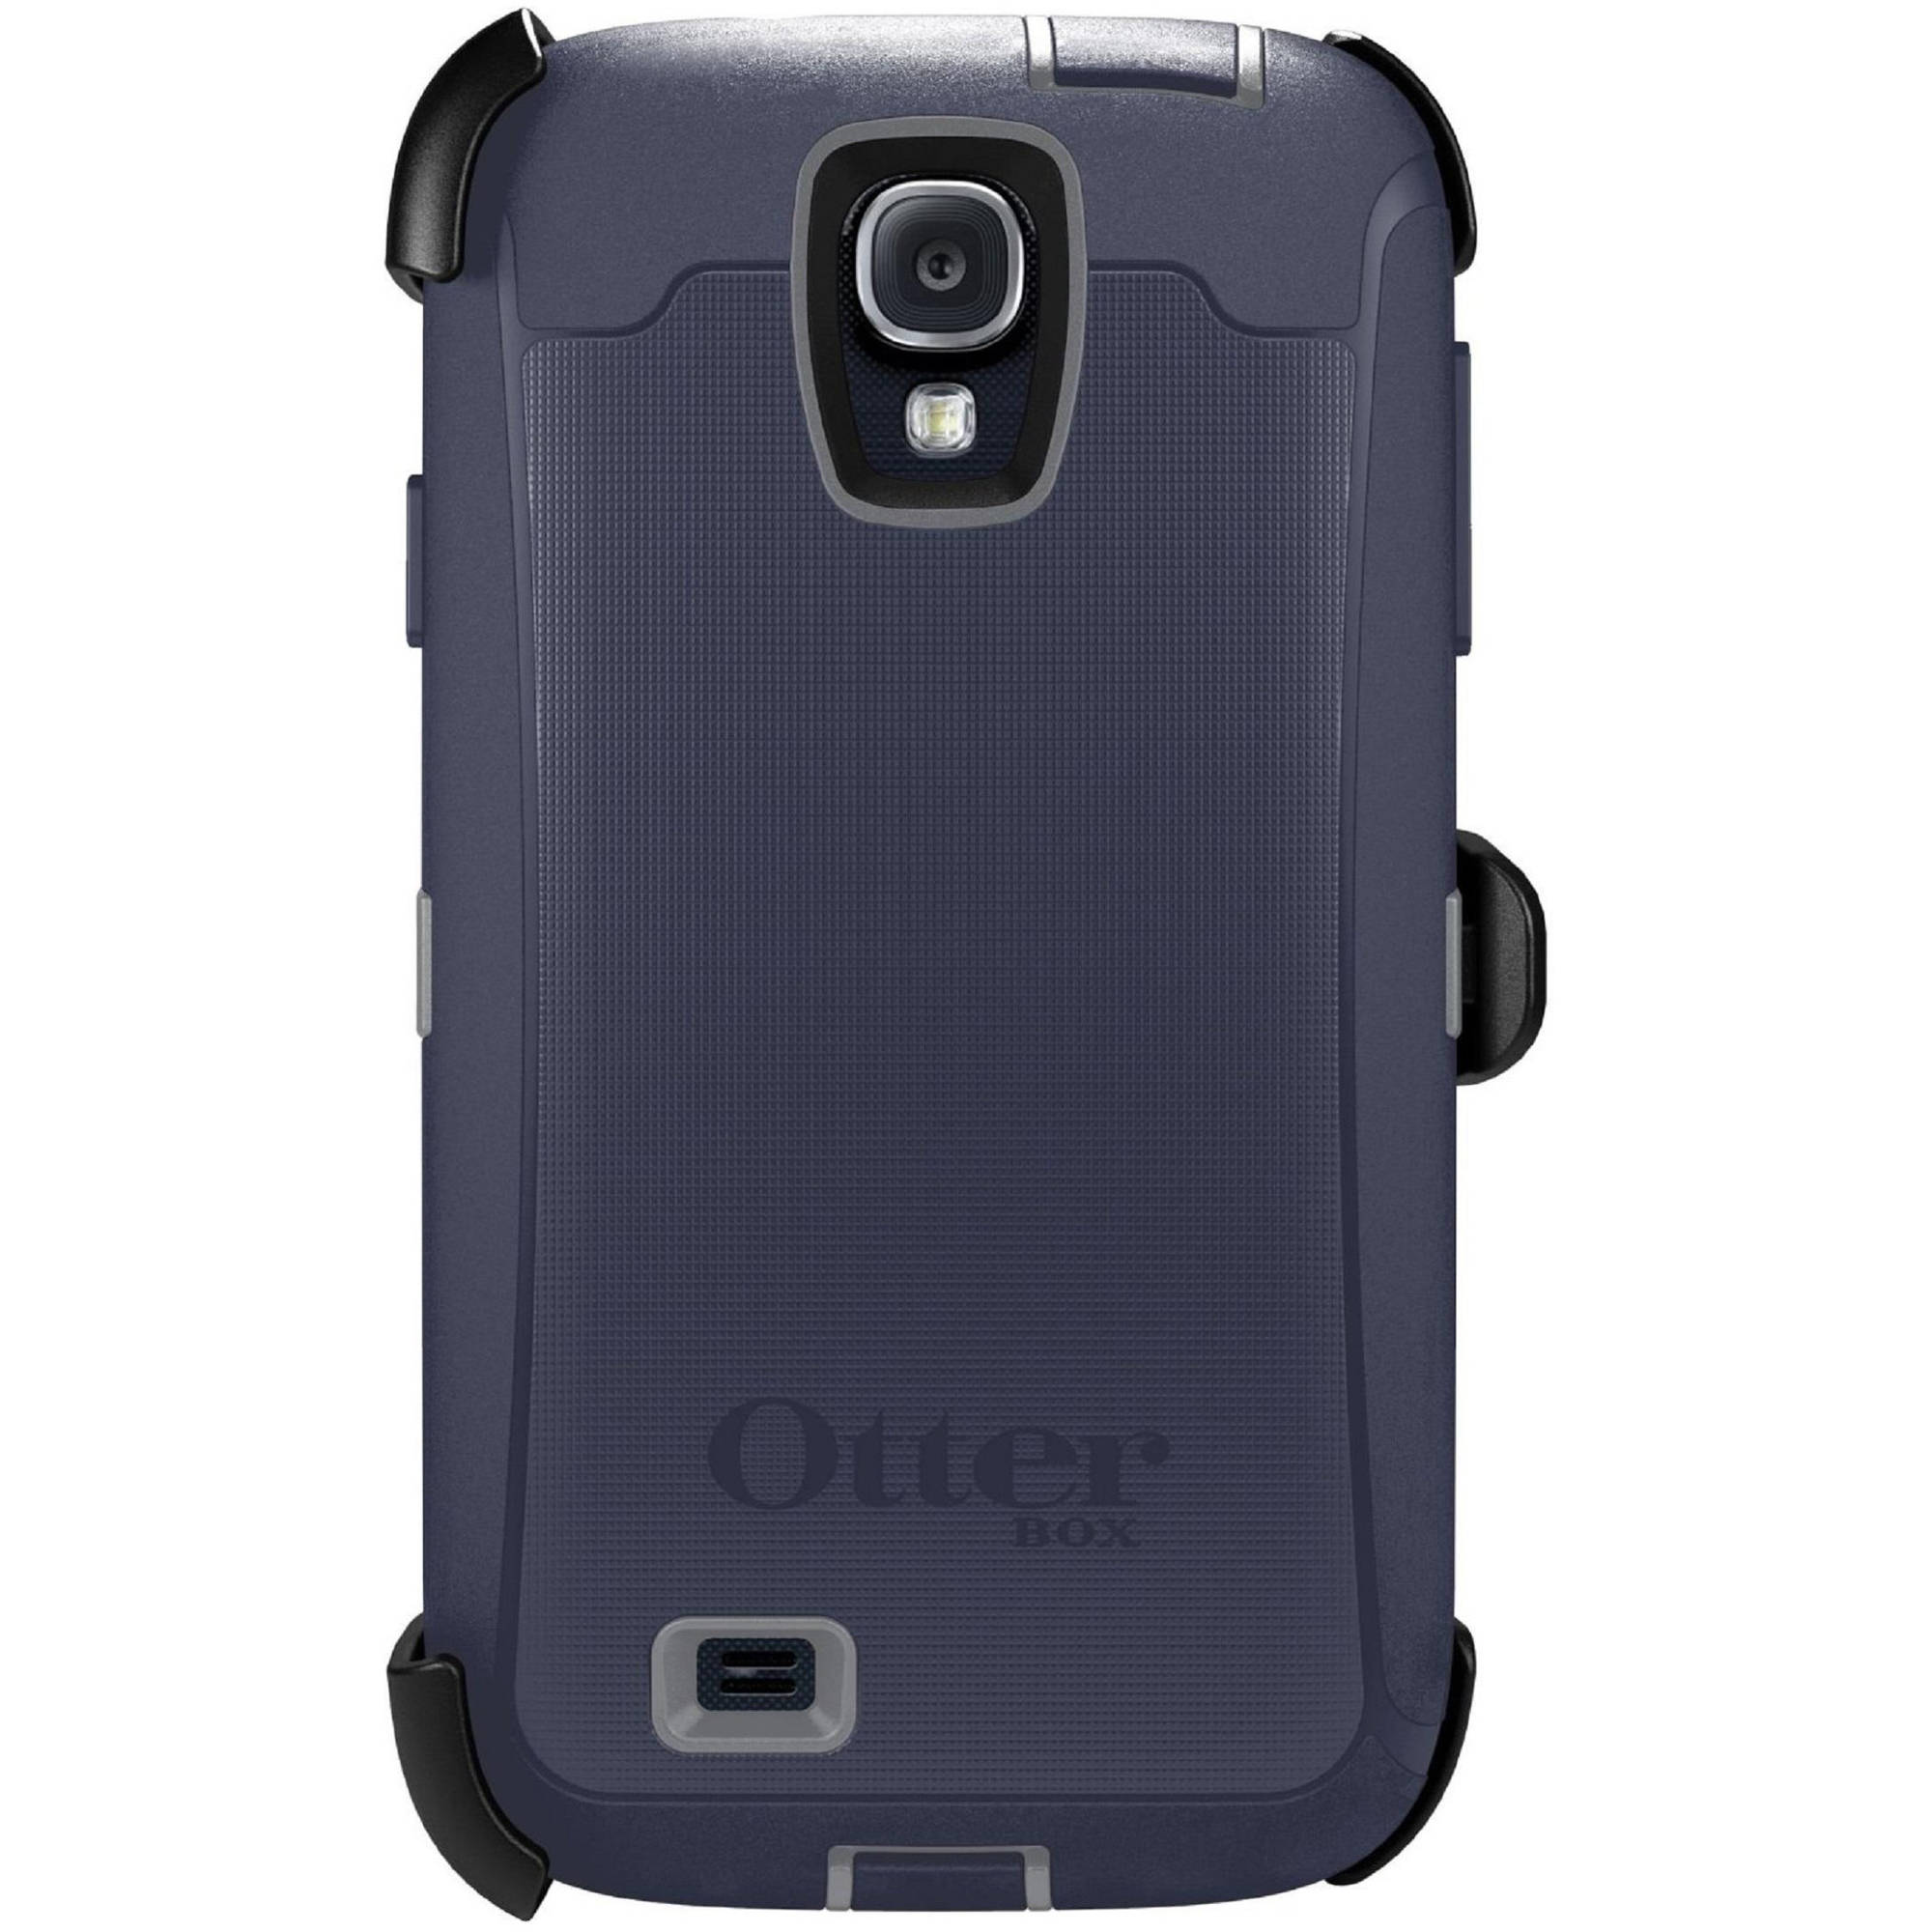 Galaxy S4  Otterbox defender series case - image 5 of 6